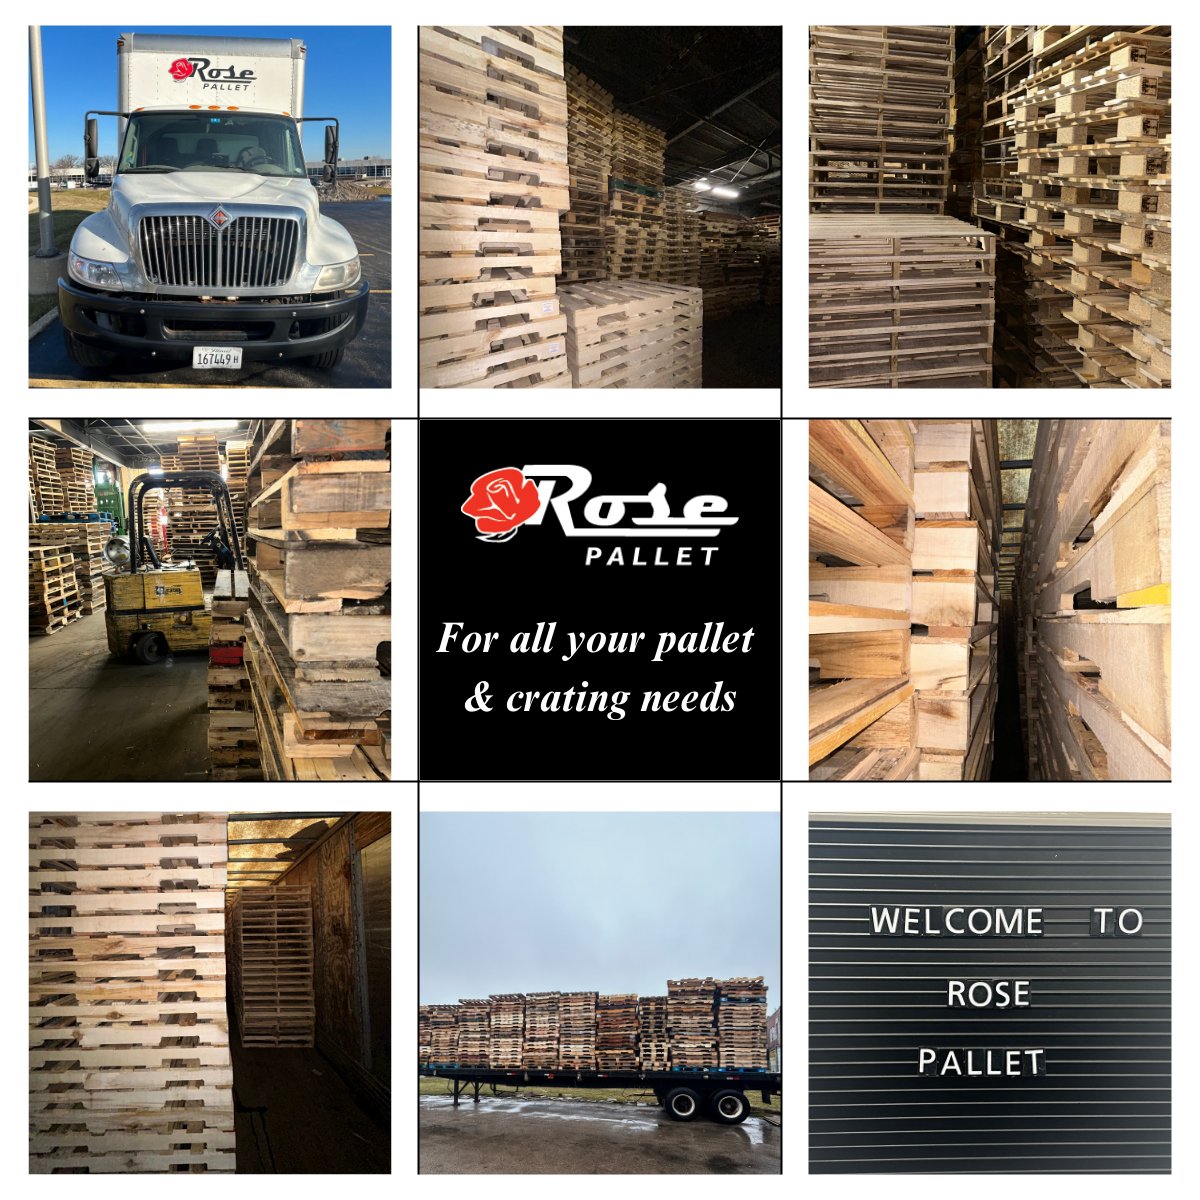 Supporting you one delivery at a time!

#MadeInAmerica #WoodPallets #MaterialHandling #ShippingCrates #AmericanMade